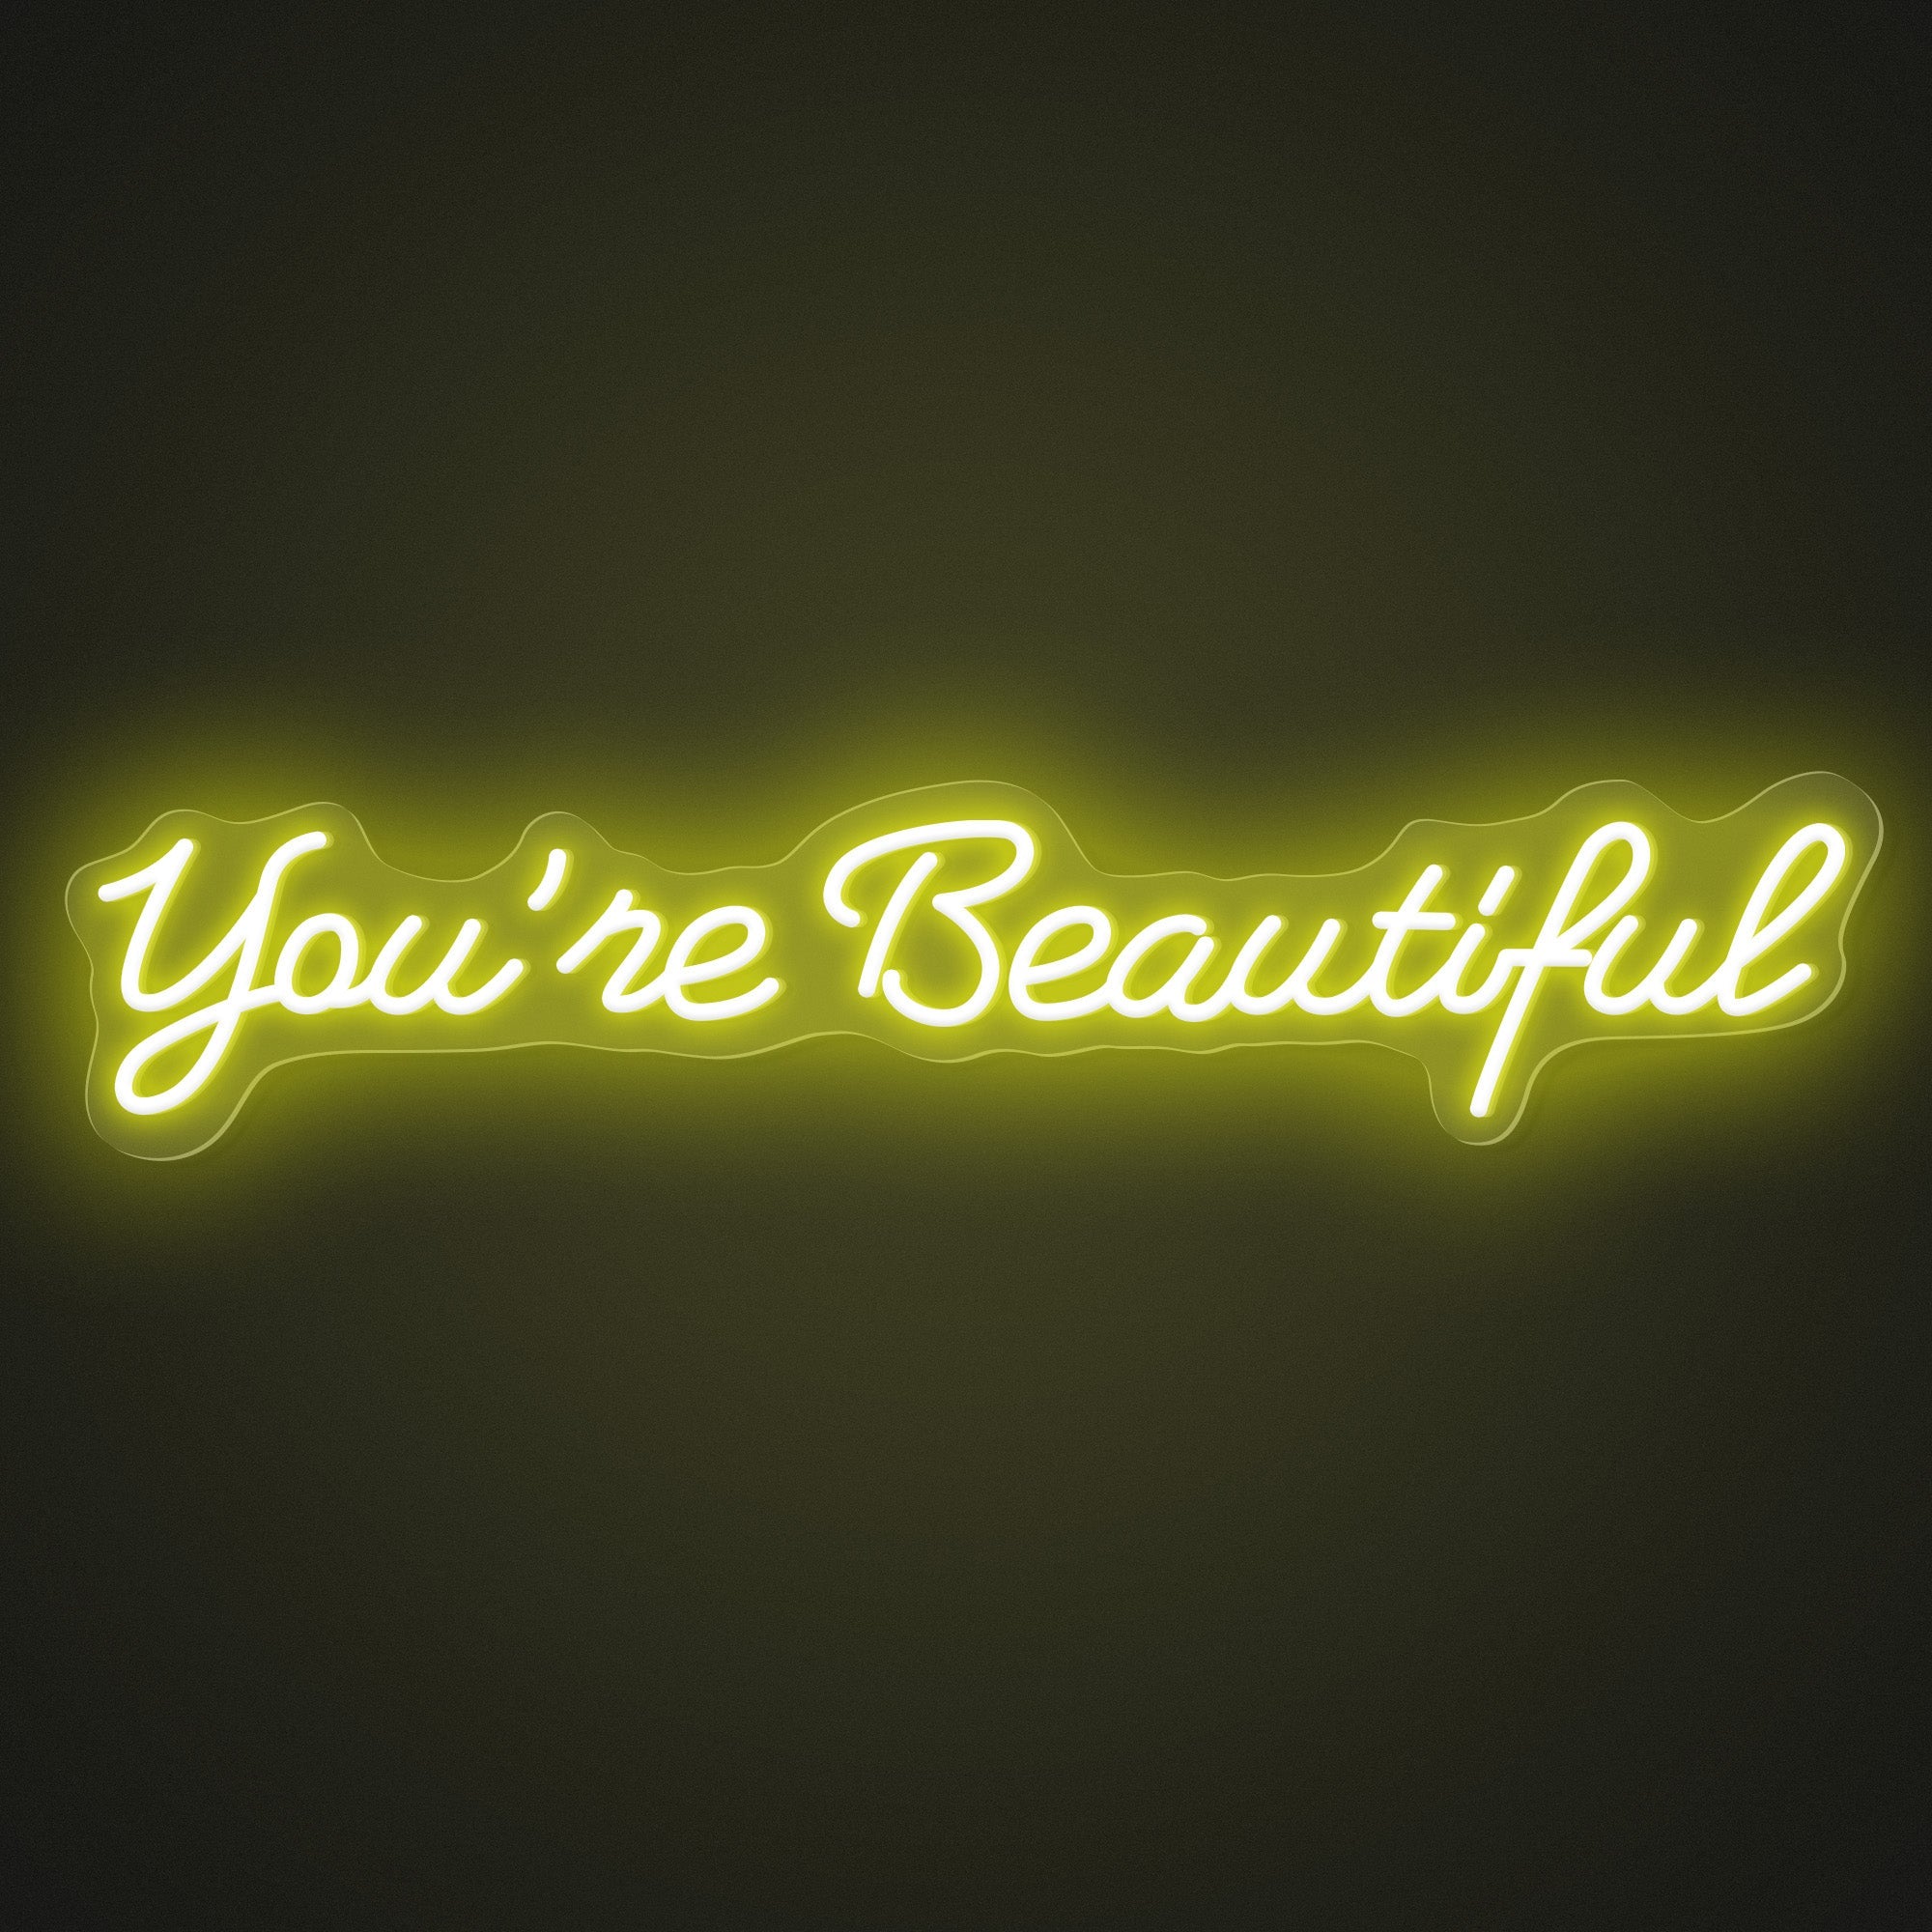 "You're Beautiful" Words Neon Sign for Room